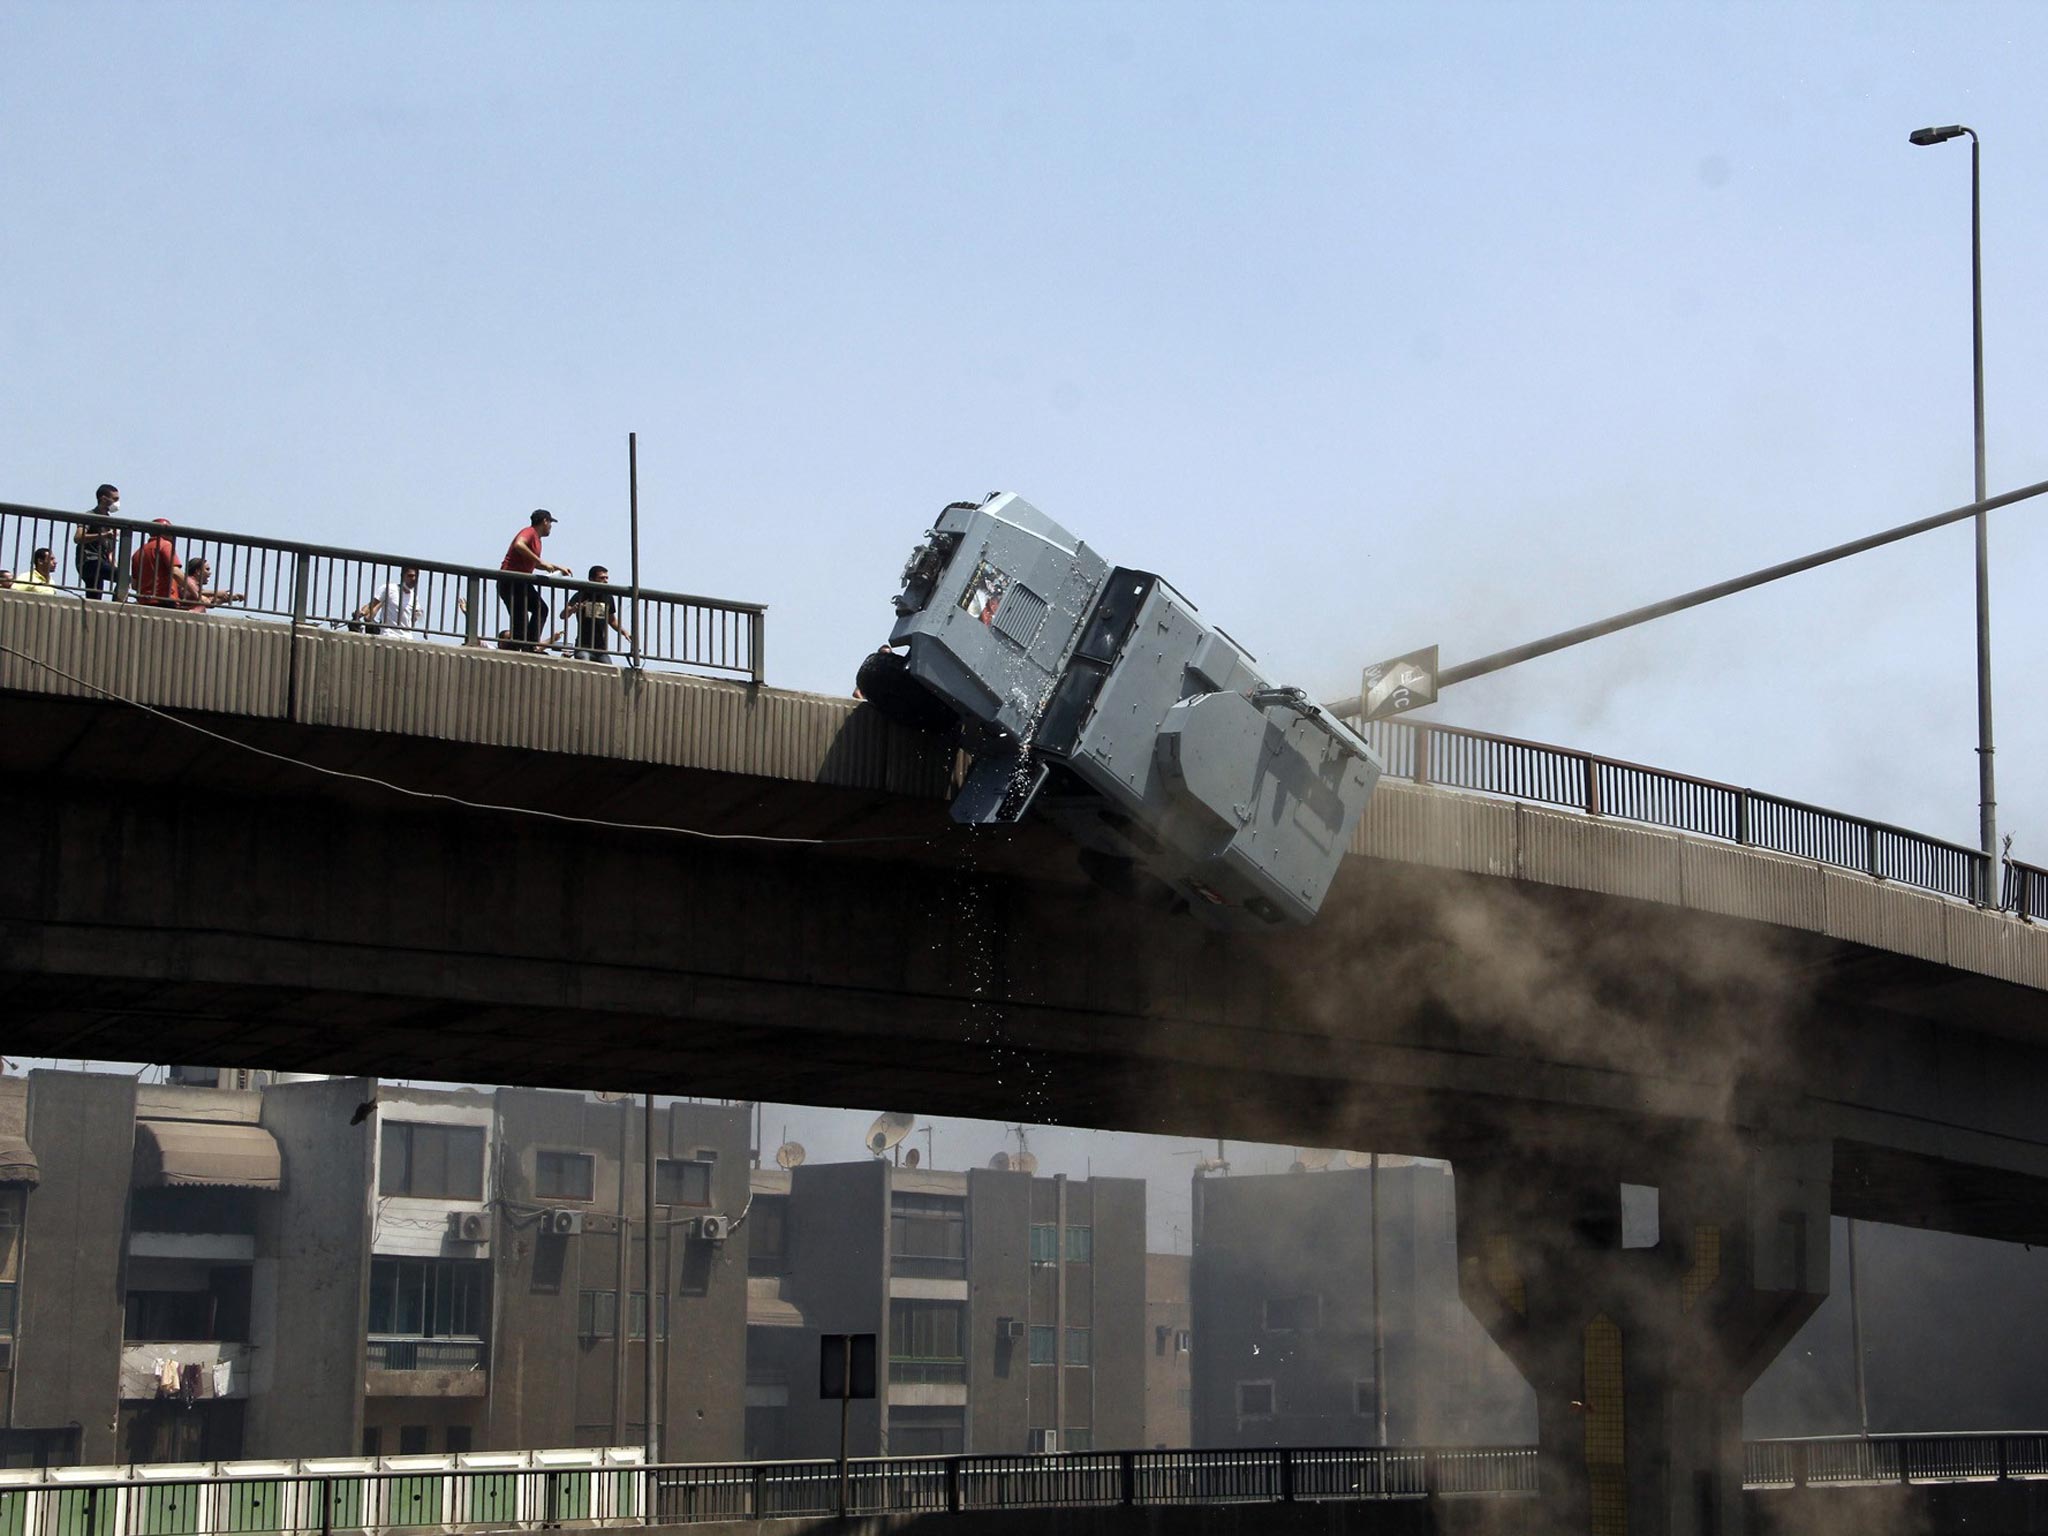 A police vehicle is pushed off the 6th of October bridge by protesters close to the largest sit-in by supporters of ousted Islamist President Mohammed Morsi in the eastern Nasr City district of Cairo, Egypt